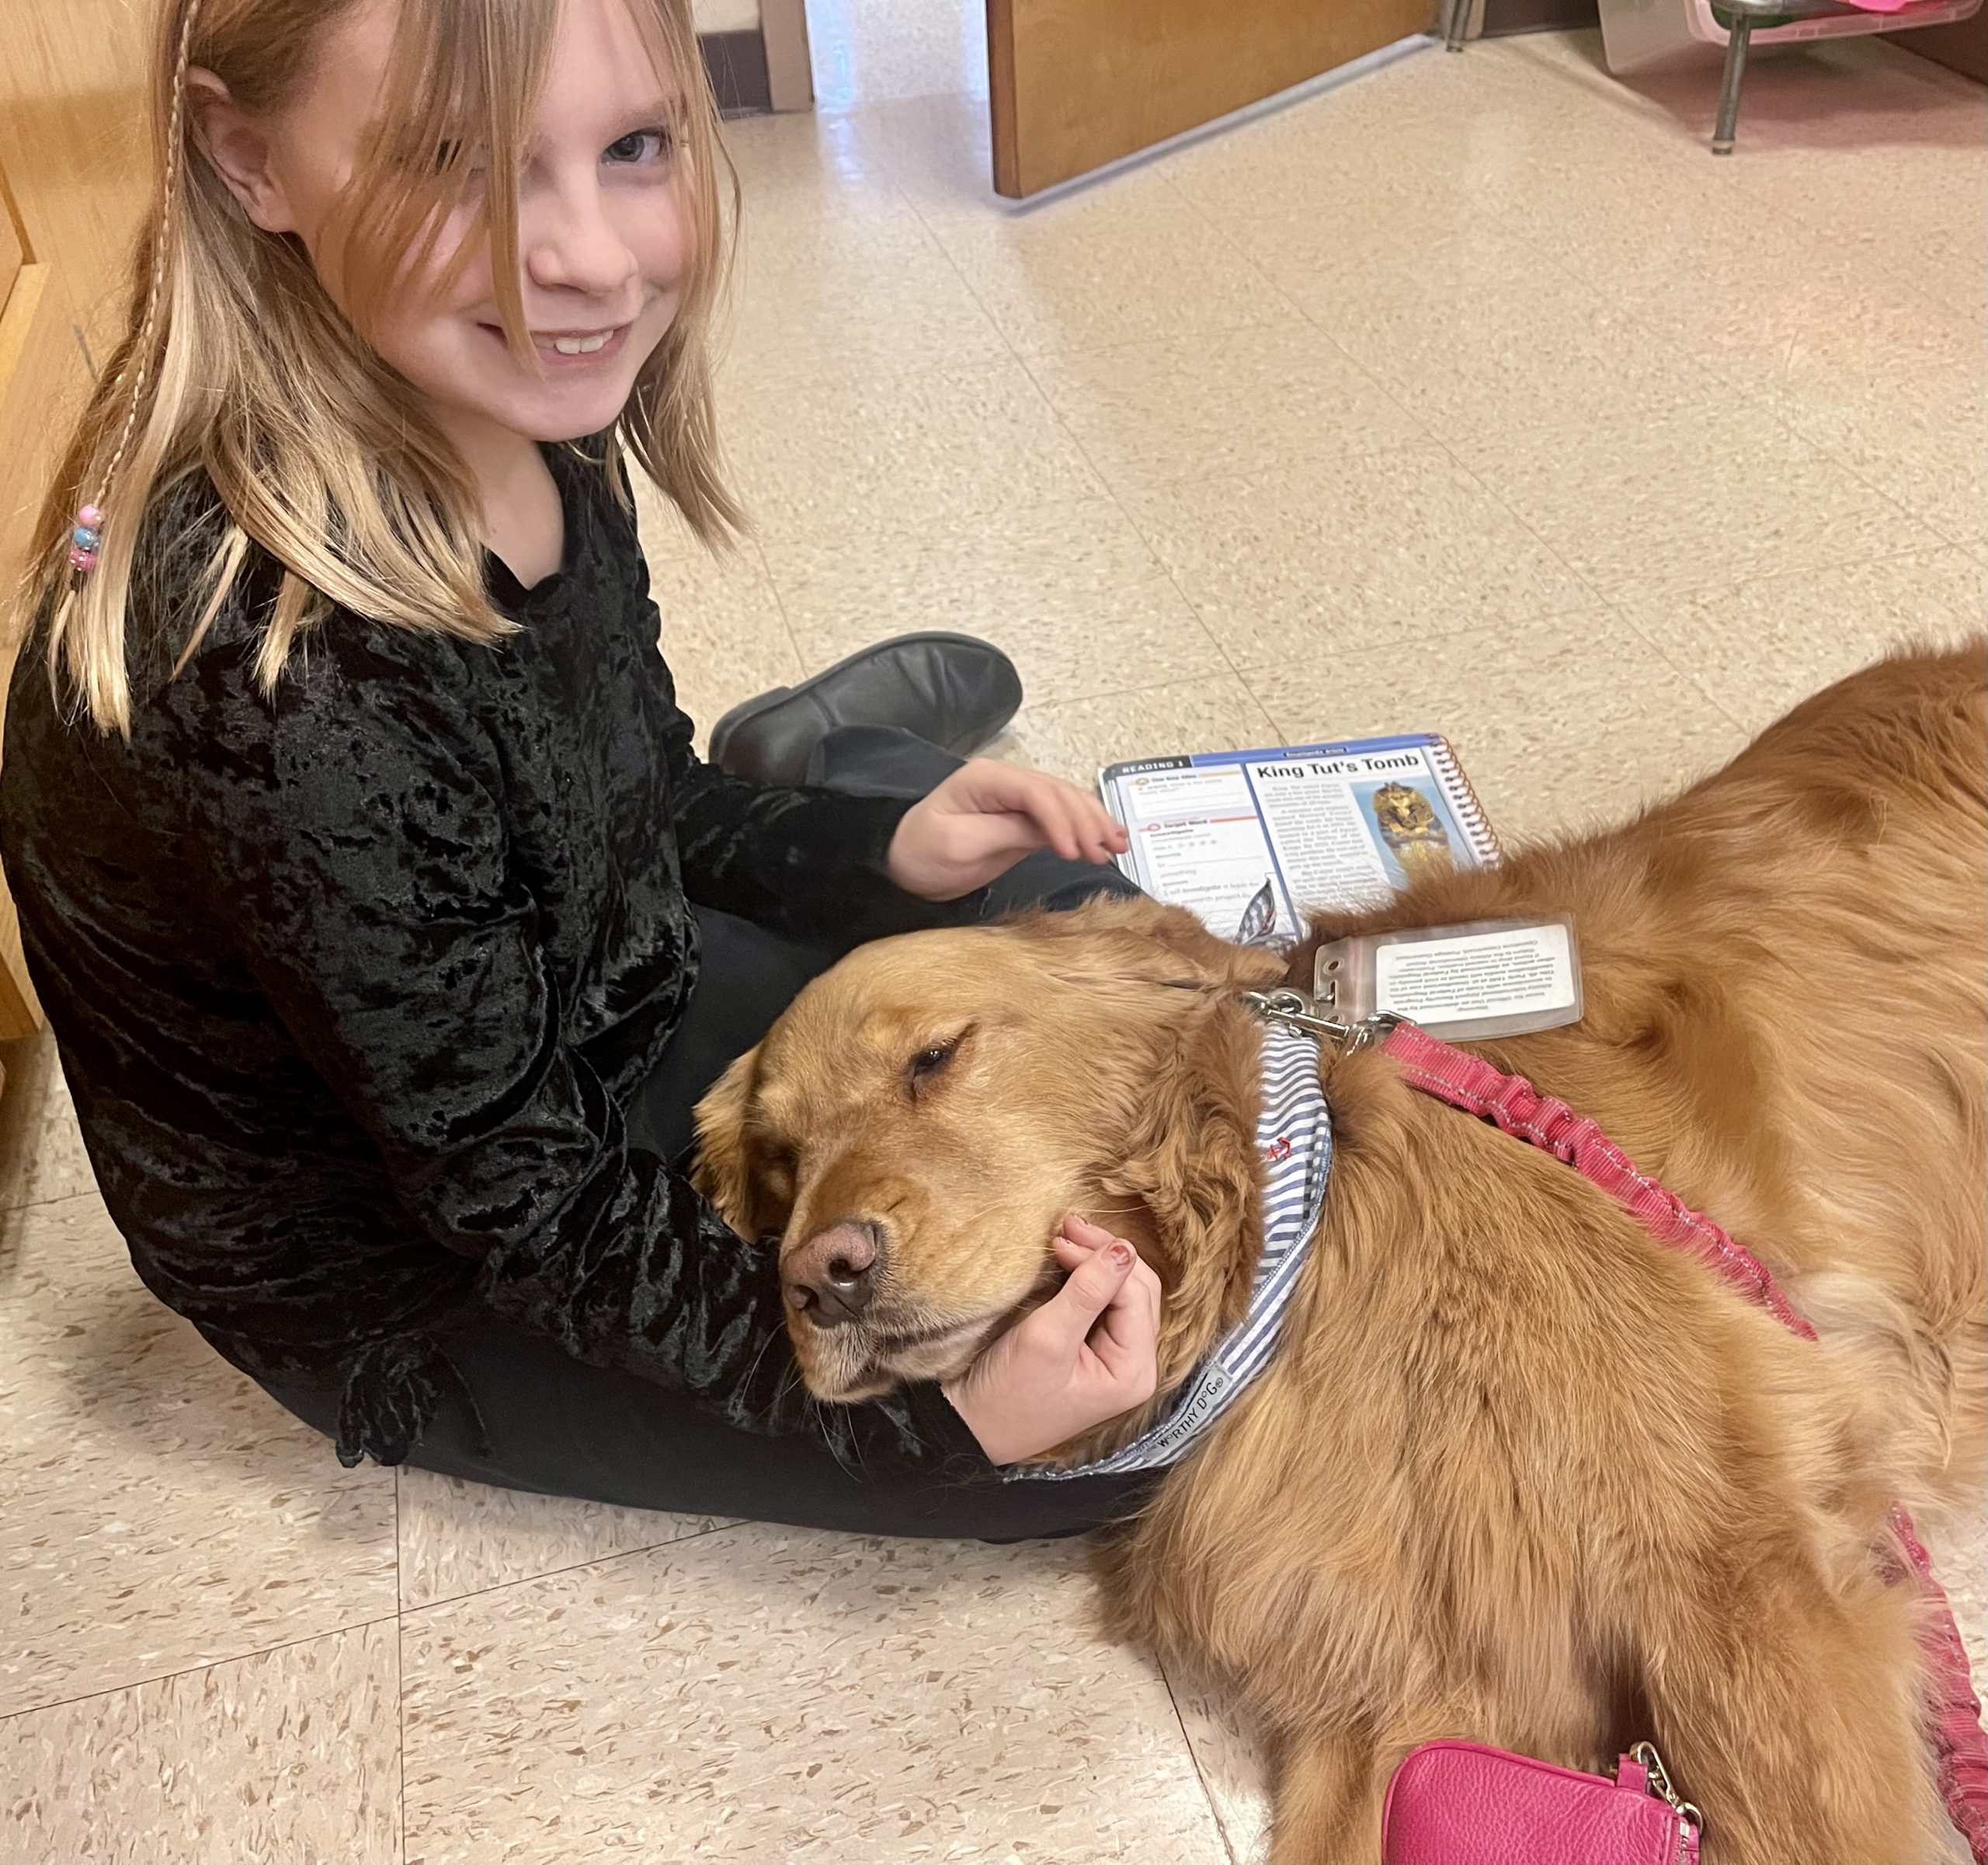 Skano students were excited to be able to read about King Tut to our therapy dog Hazel.